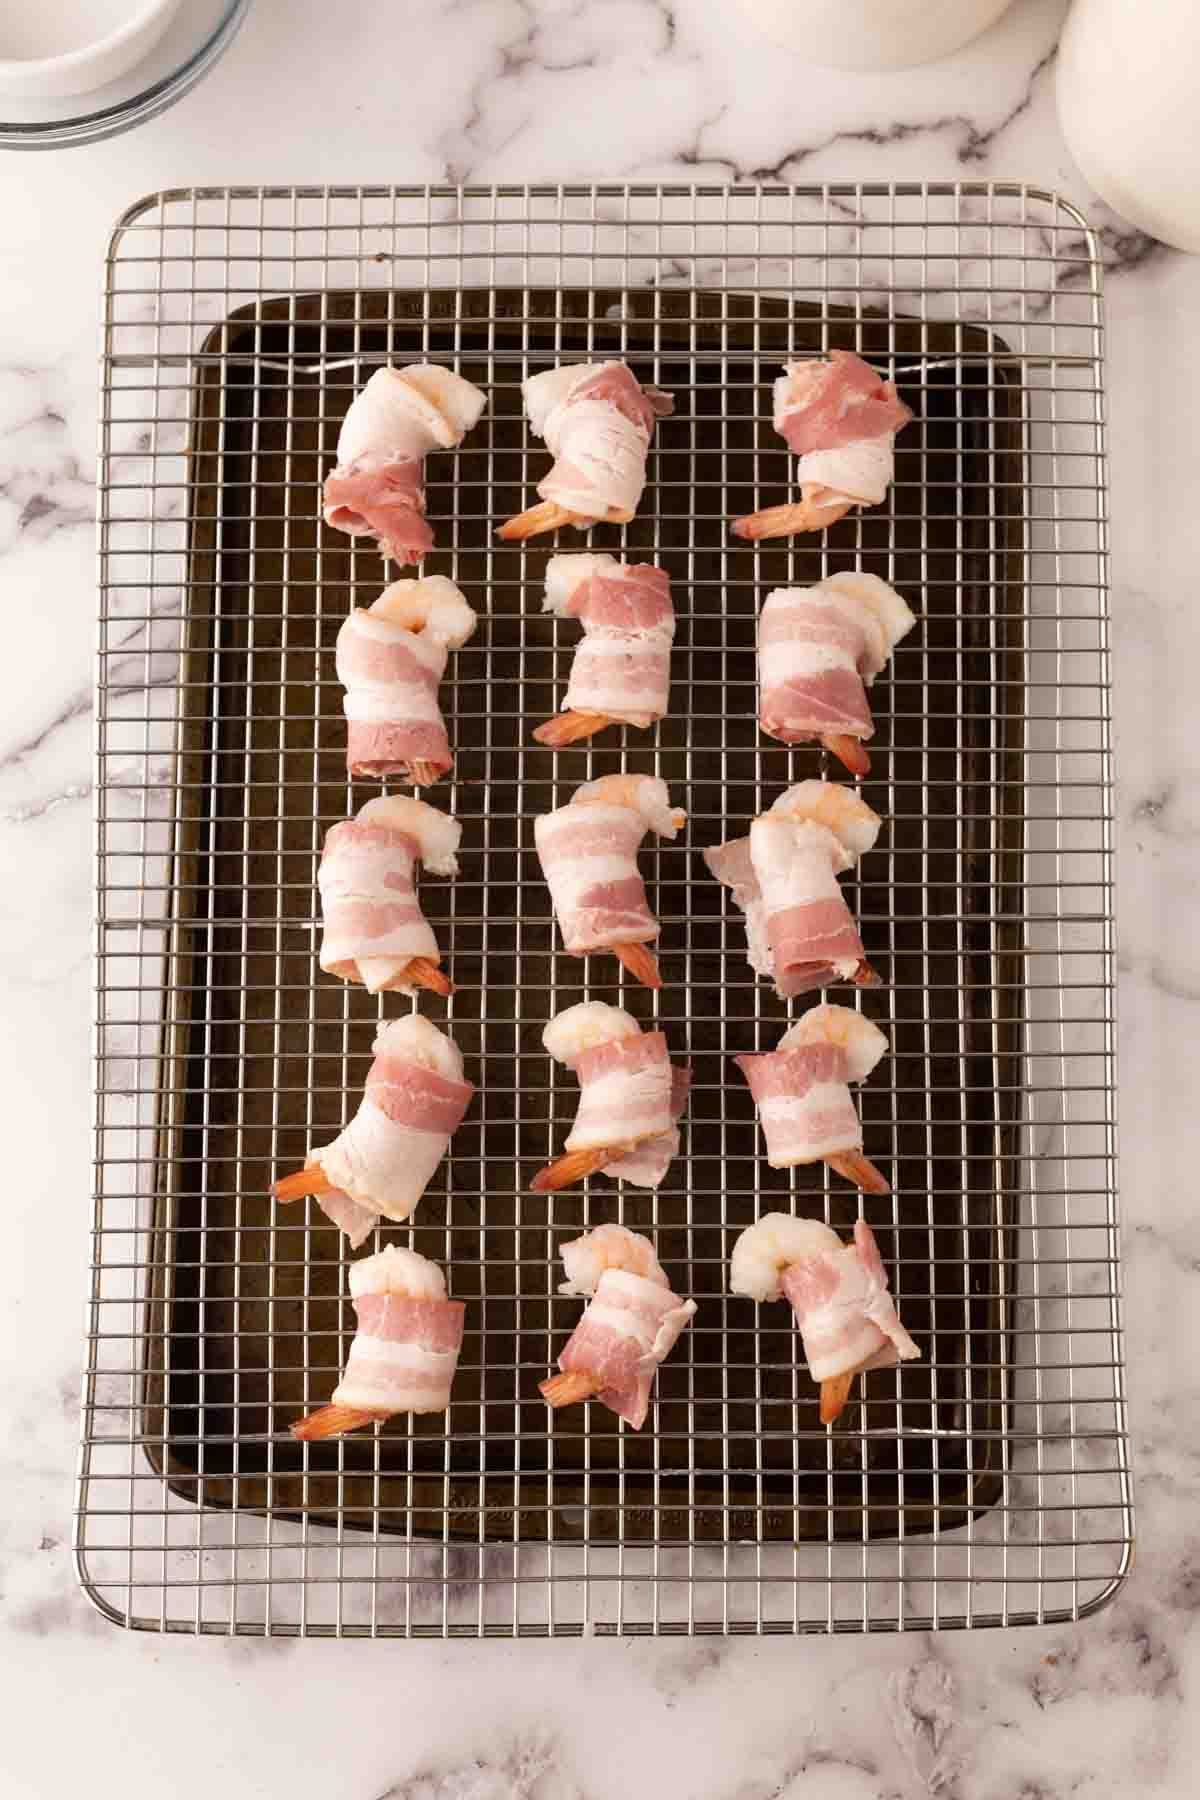 raw bacon wrapped shrimp on a tray over a baking dish.